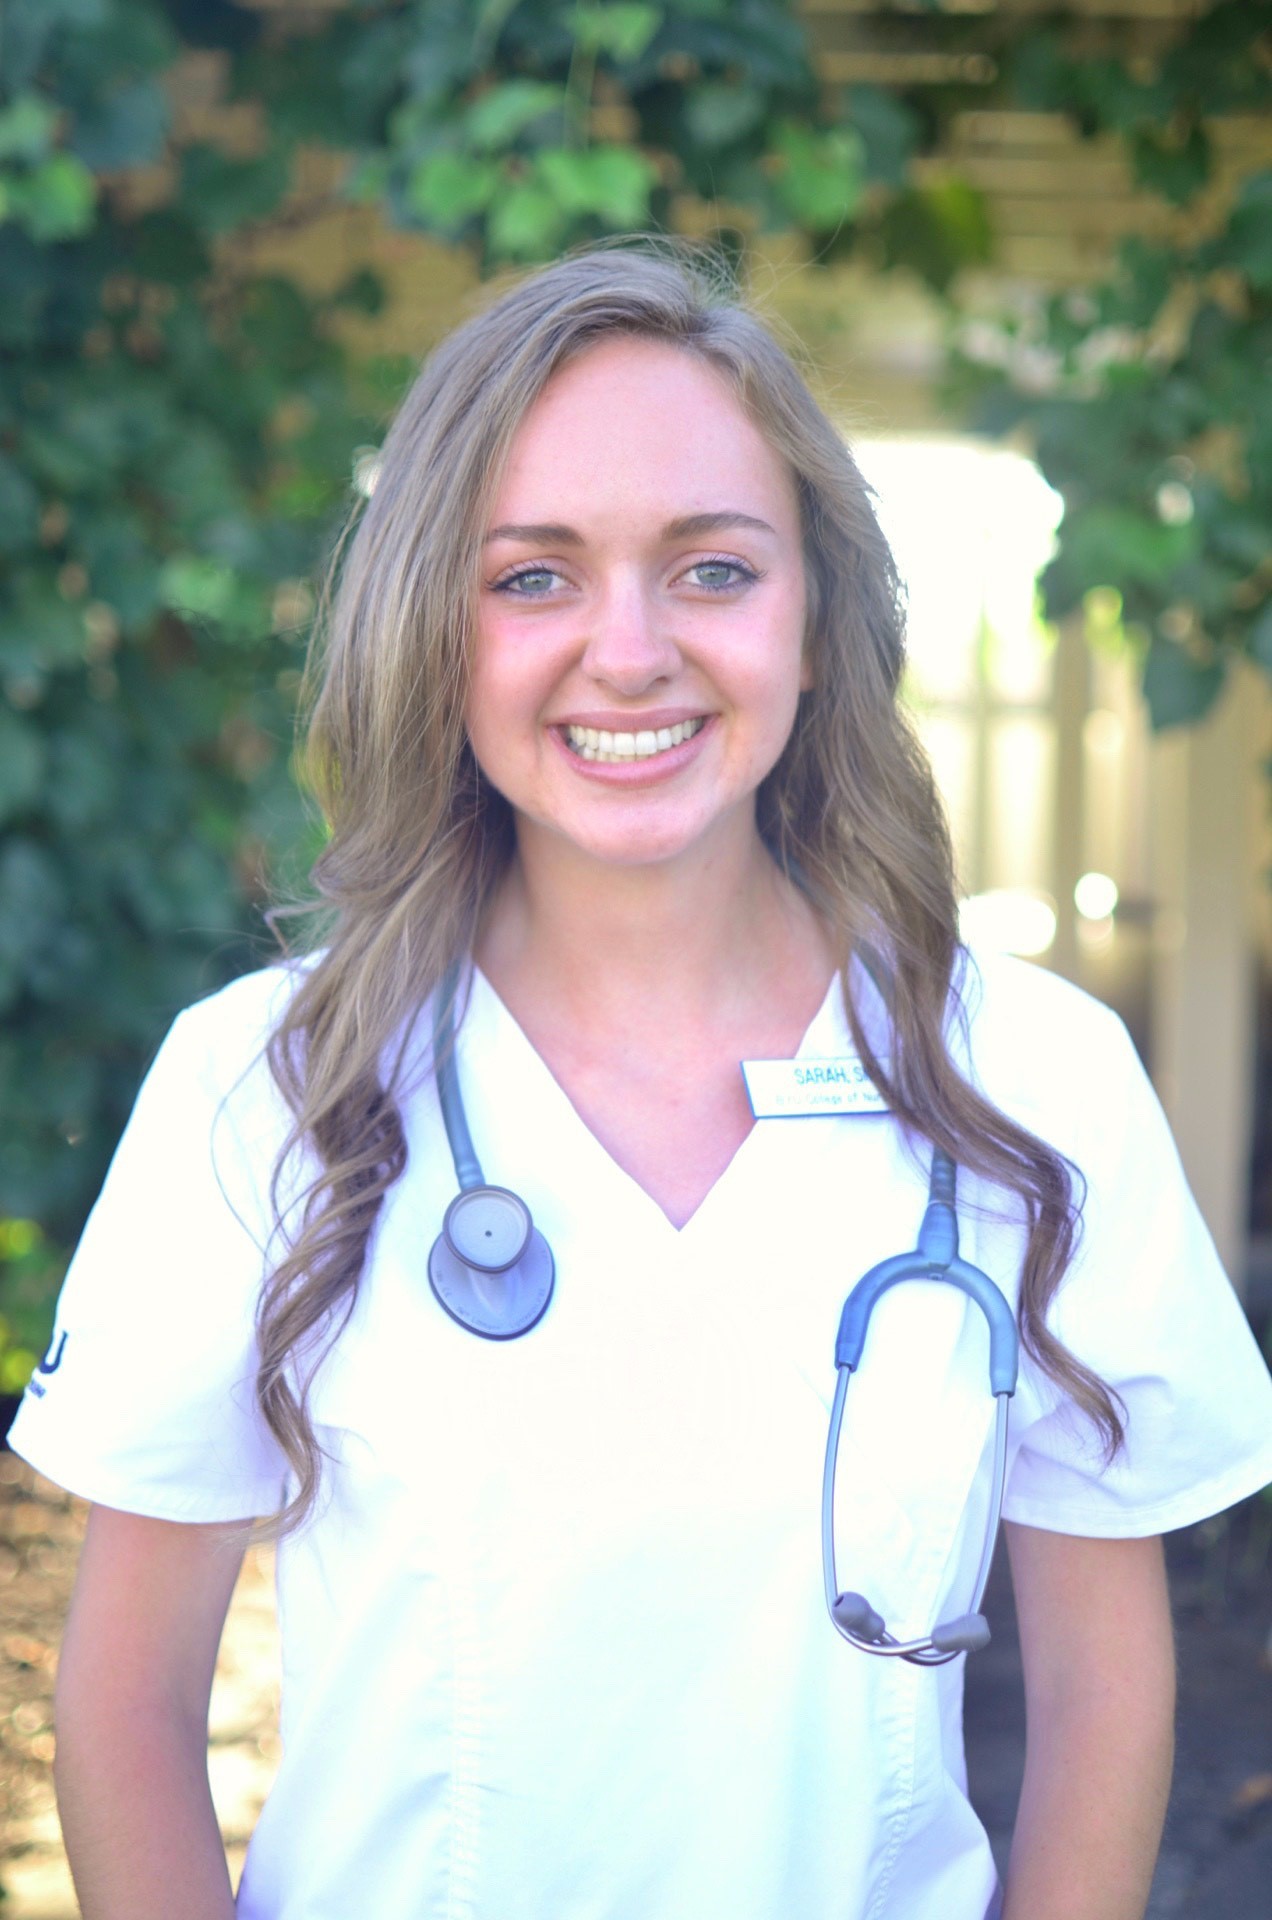 Student nurse with uniform, stethoscope, and nametag.